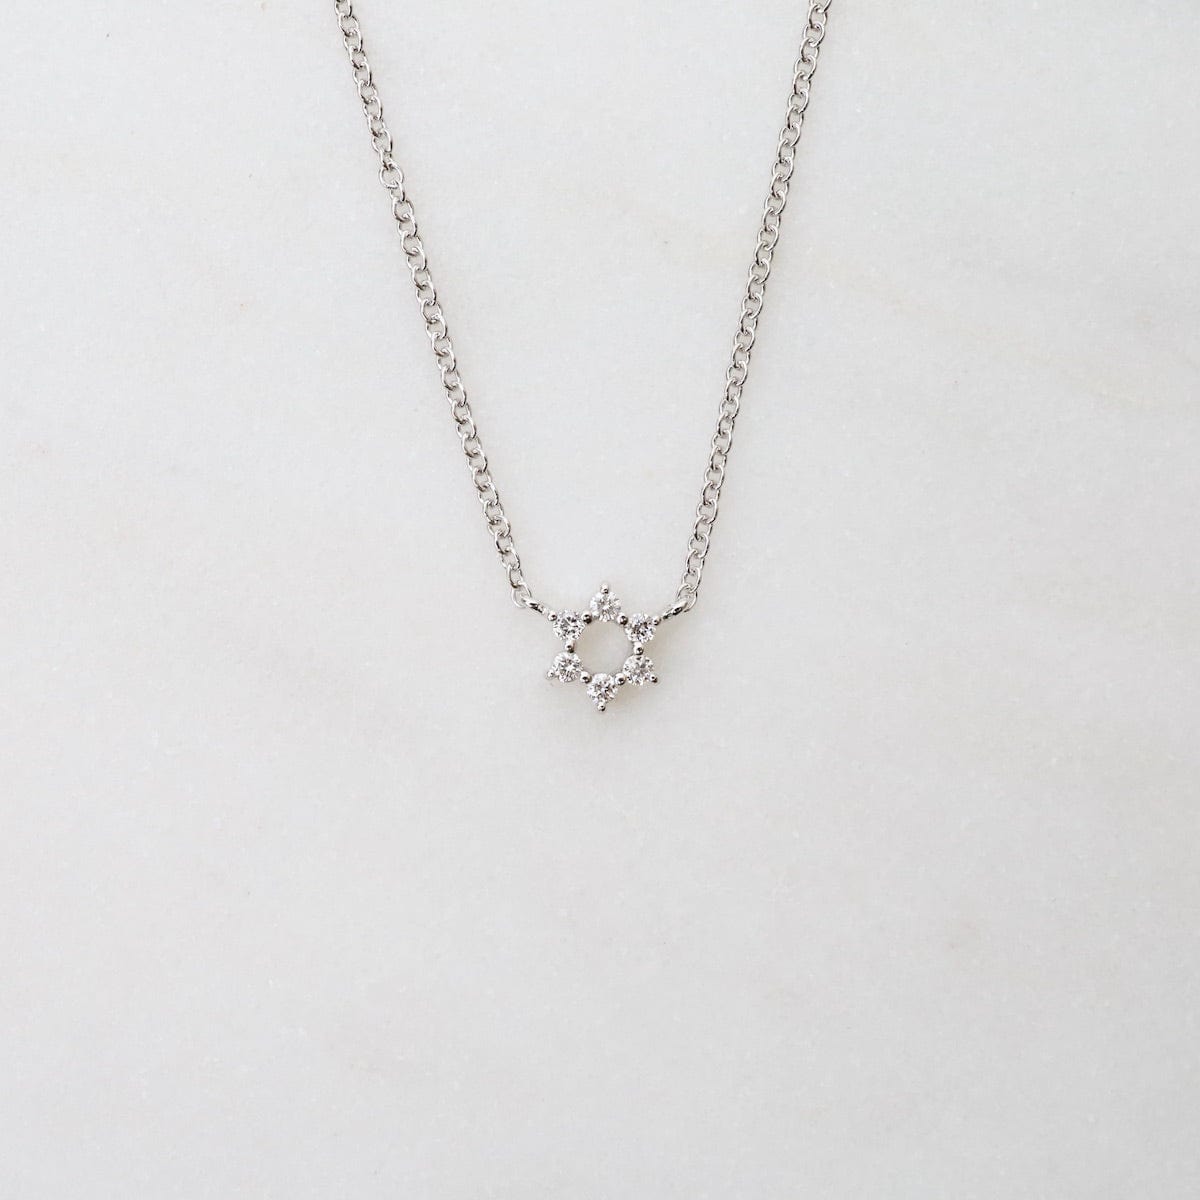 NKL-14K Mini Circle of Life Necklace in White Gold